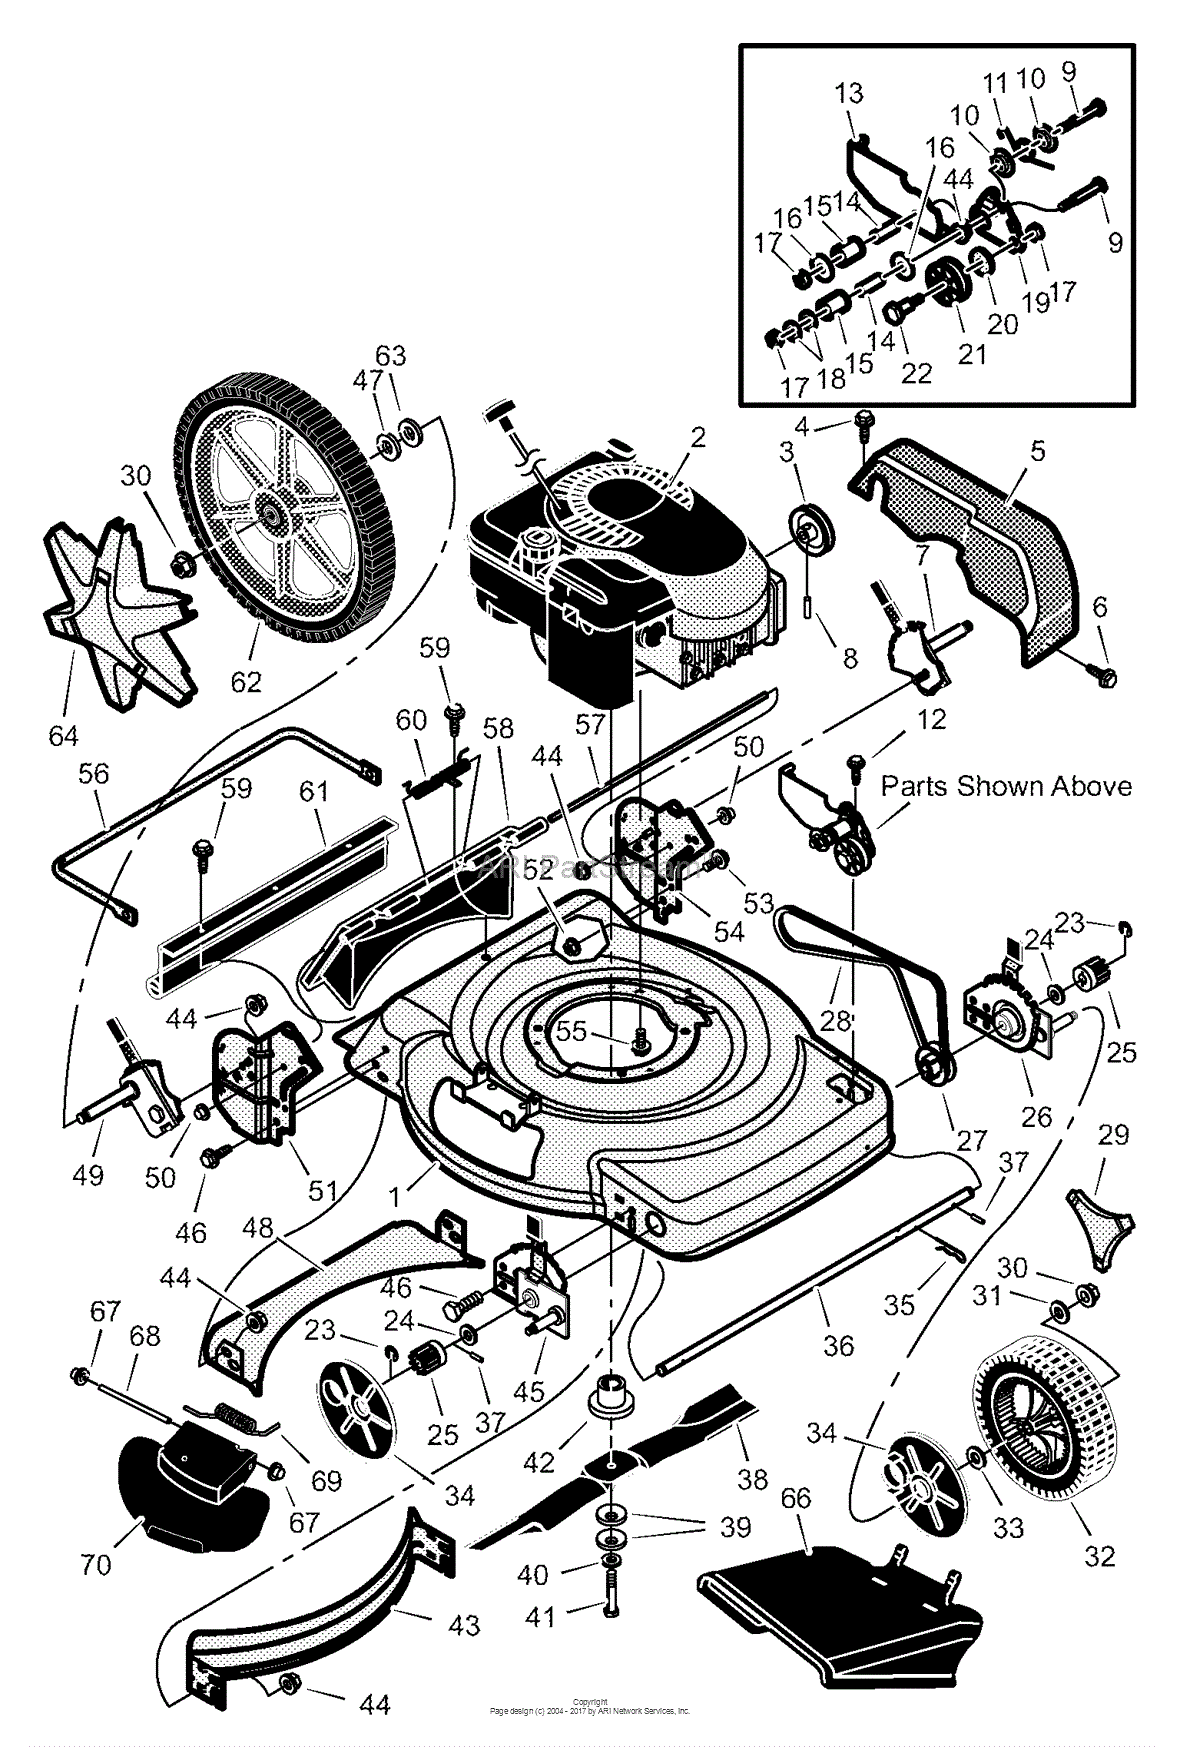 Labeled Lawn Mower Engine Diagram - Murray 38602x70J - Lawn Tractor